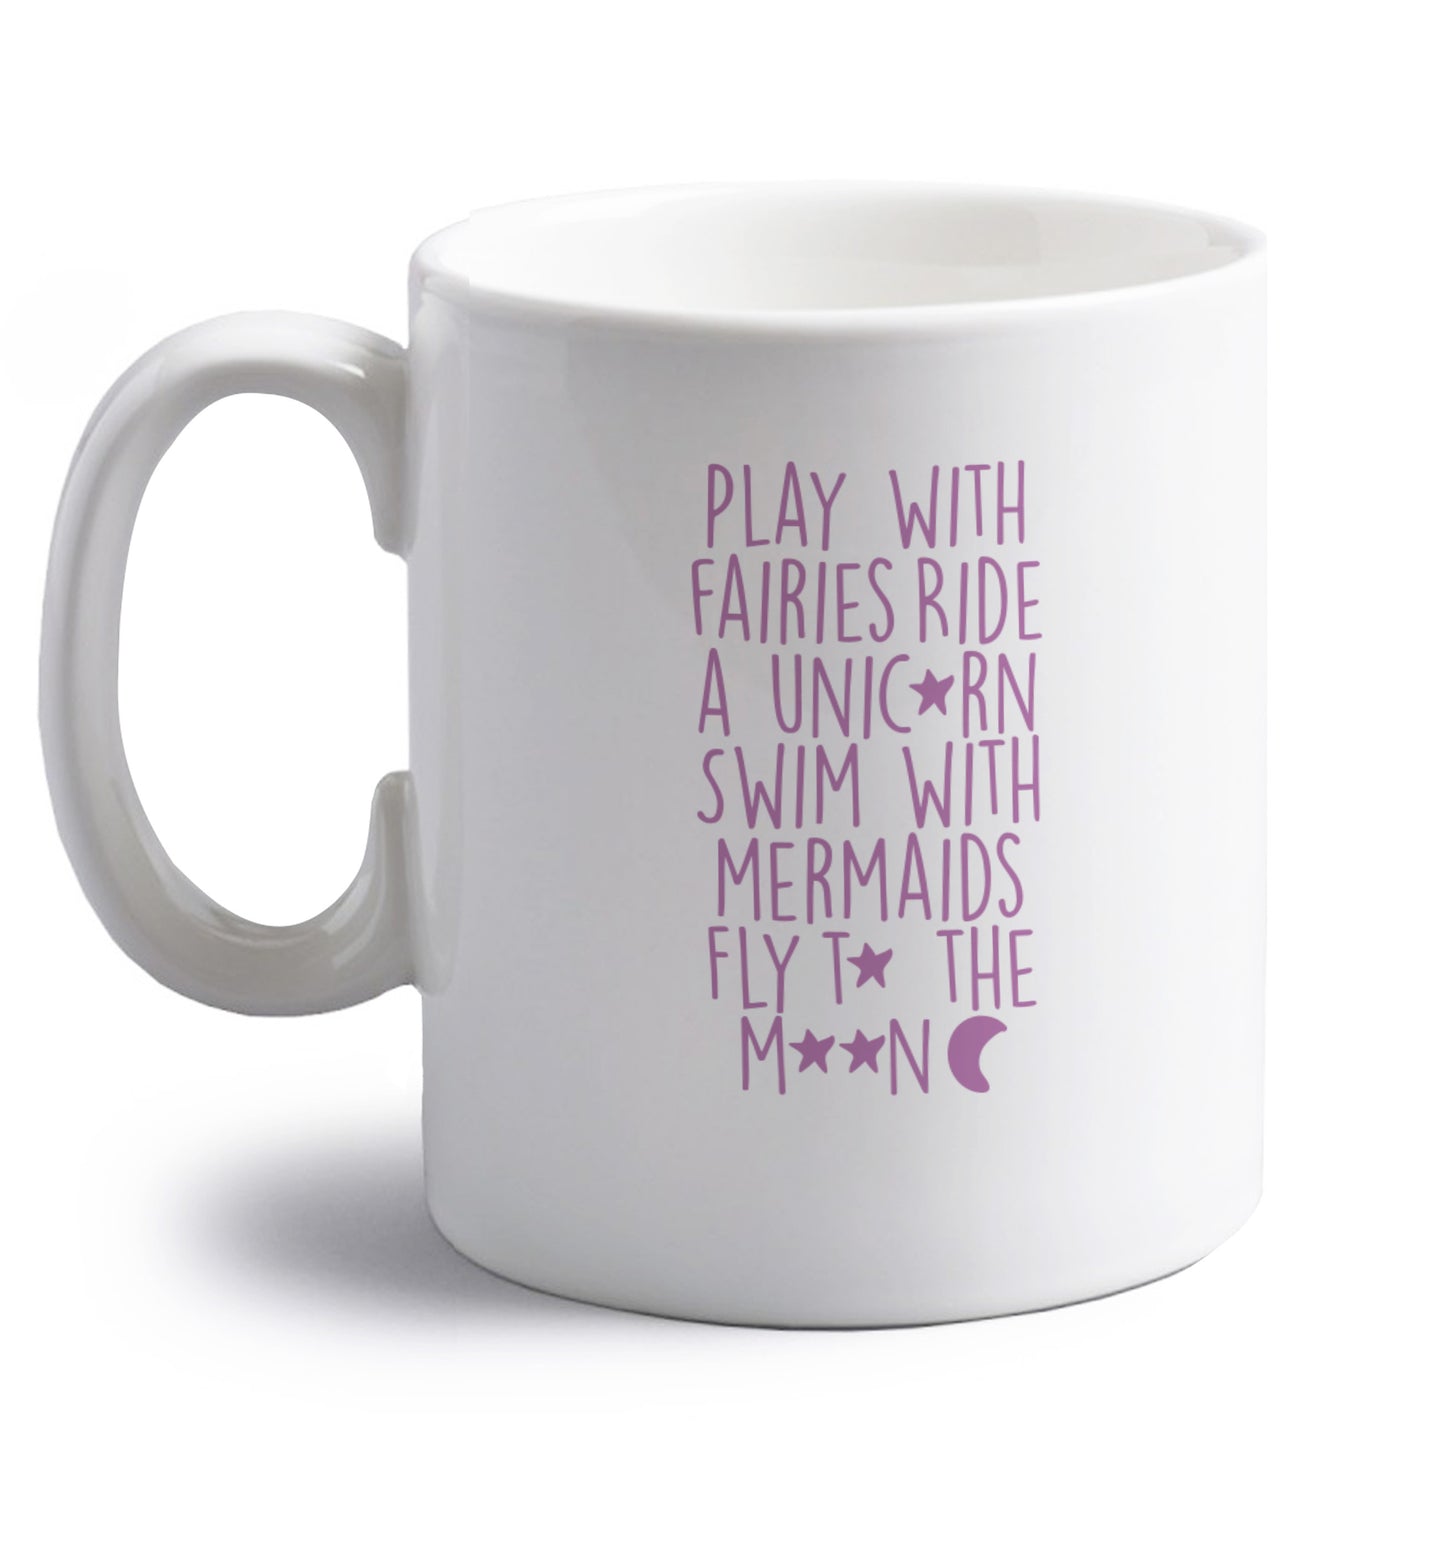 Play with fairies ride a unicorn swim with mermaids fly to the moon right handed white ceramic mug 